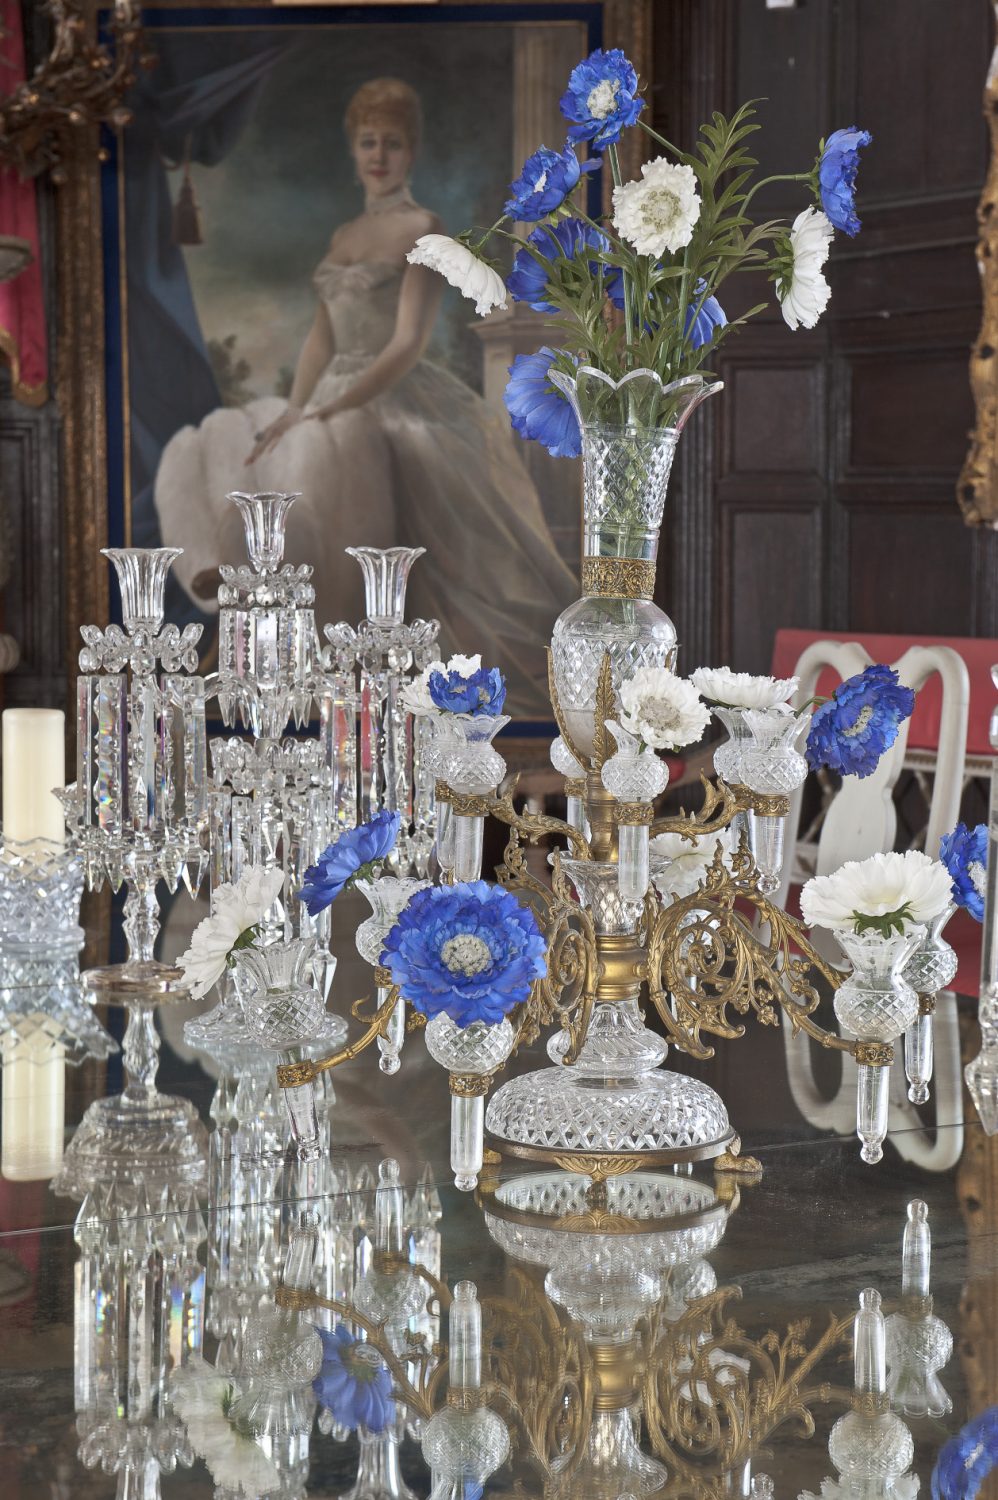 The mirrored table top in the Oak Room produces a wonderful effect when the candelabra are lit and the epergne filled with flowers